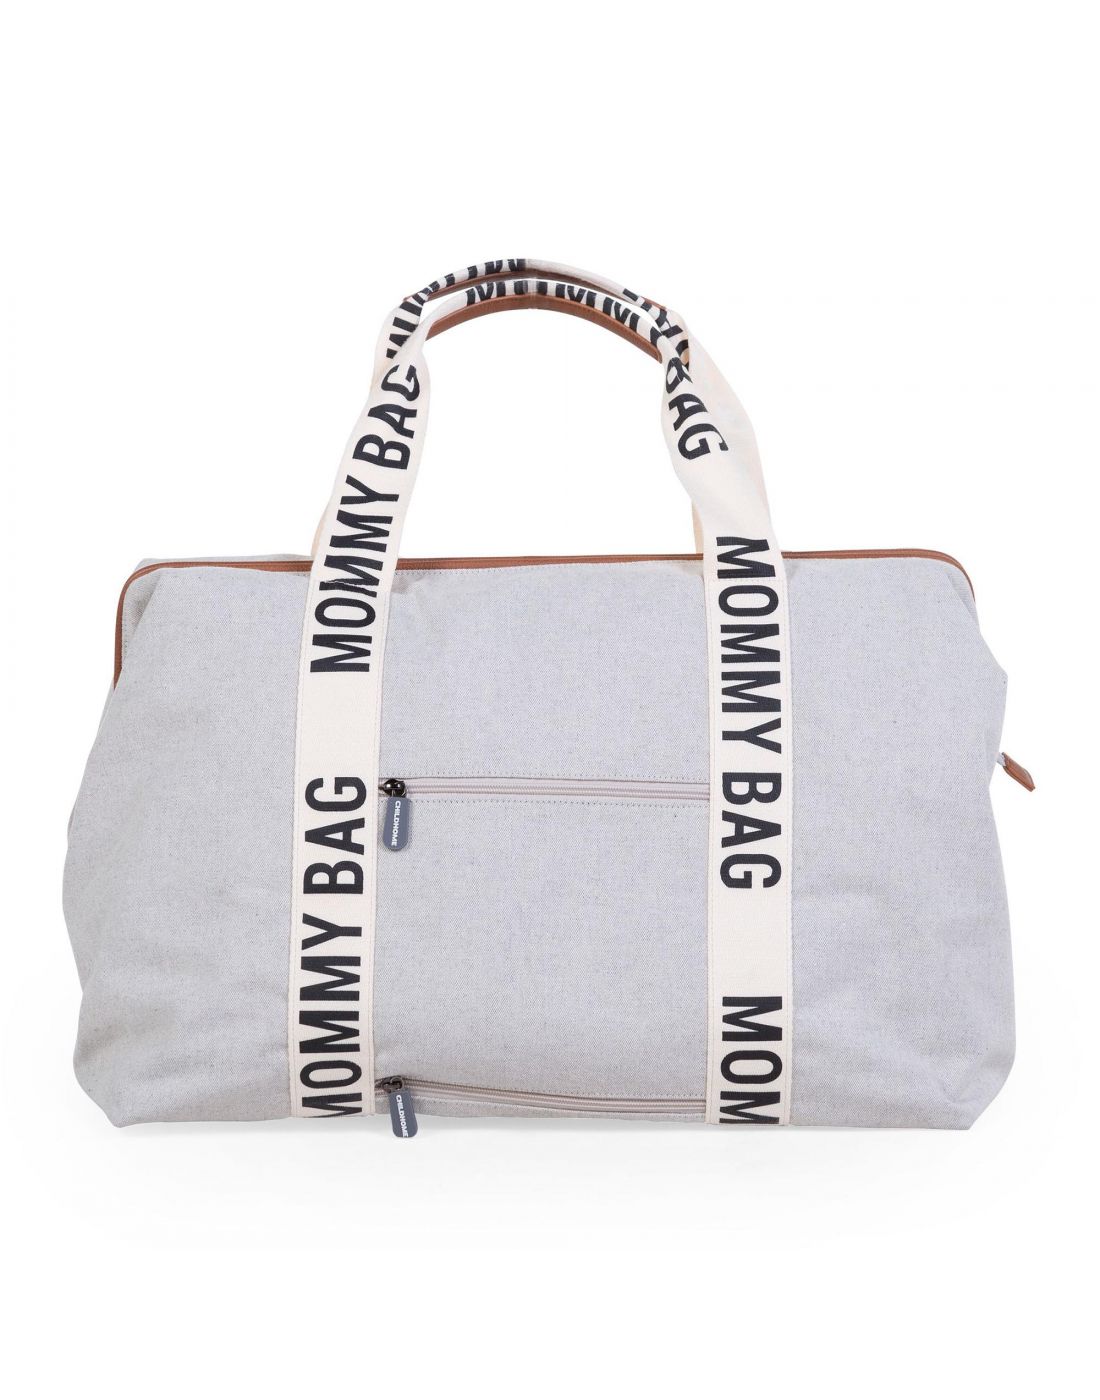 ChildhomeMommy Bag Sinature Canvas Off White